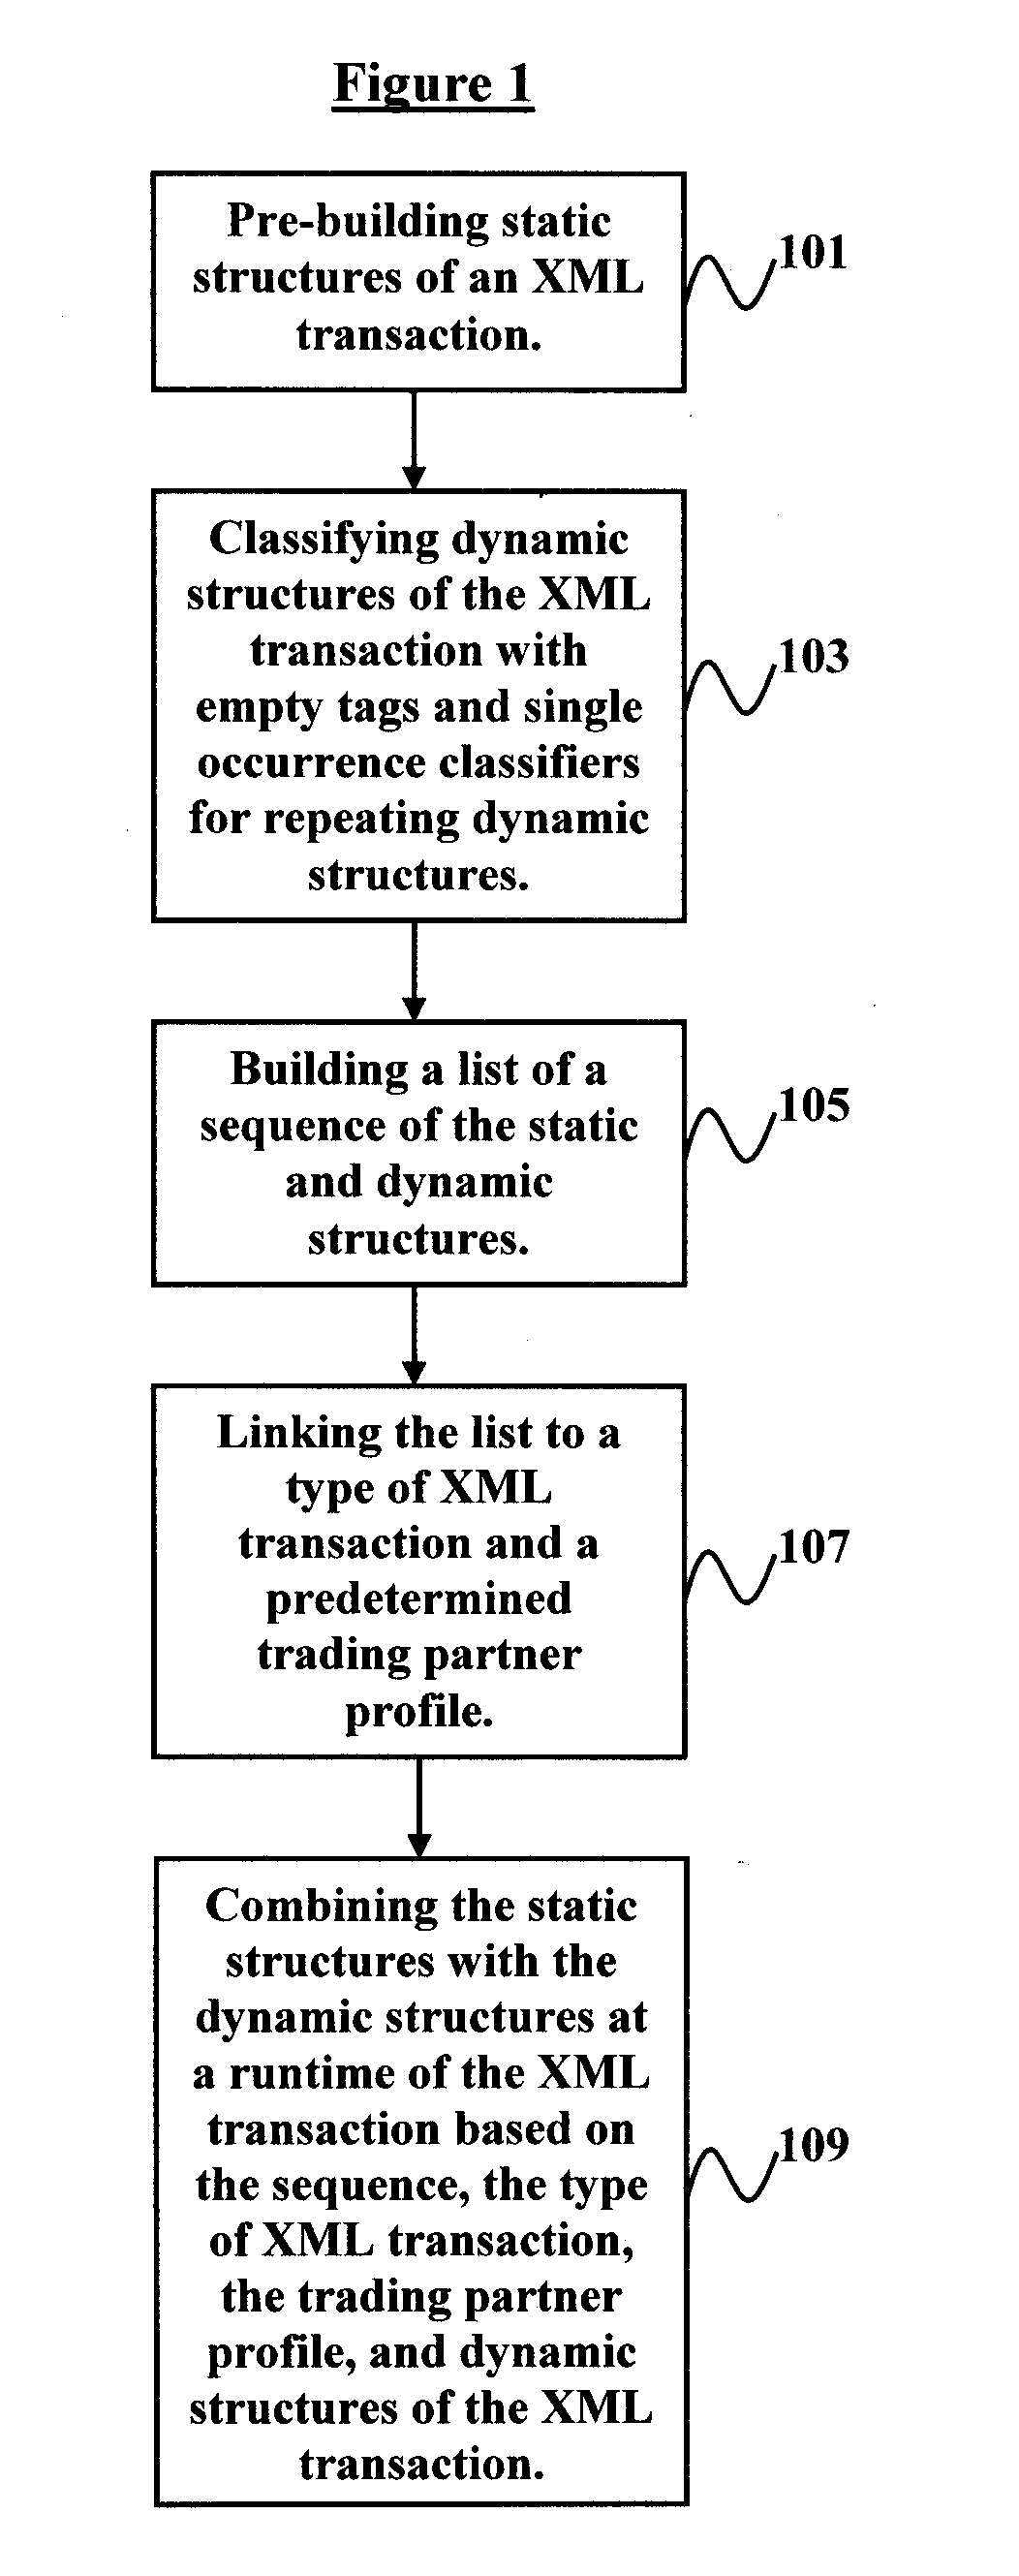 A system and method for speeding XML construction for a business transaction using prebuilt XML with static and dynamic sections